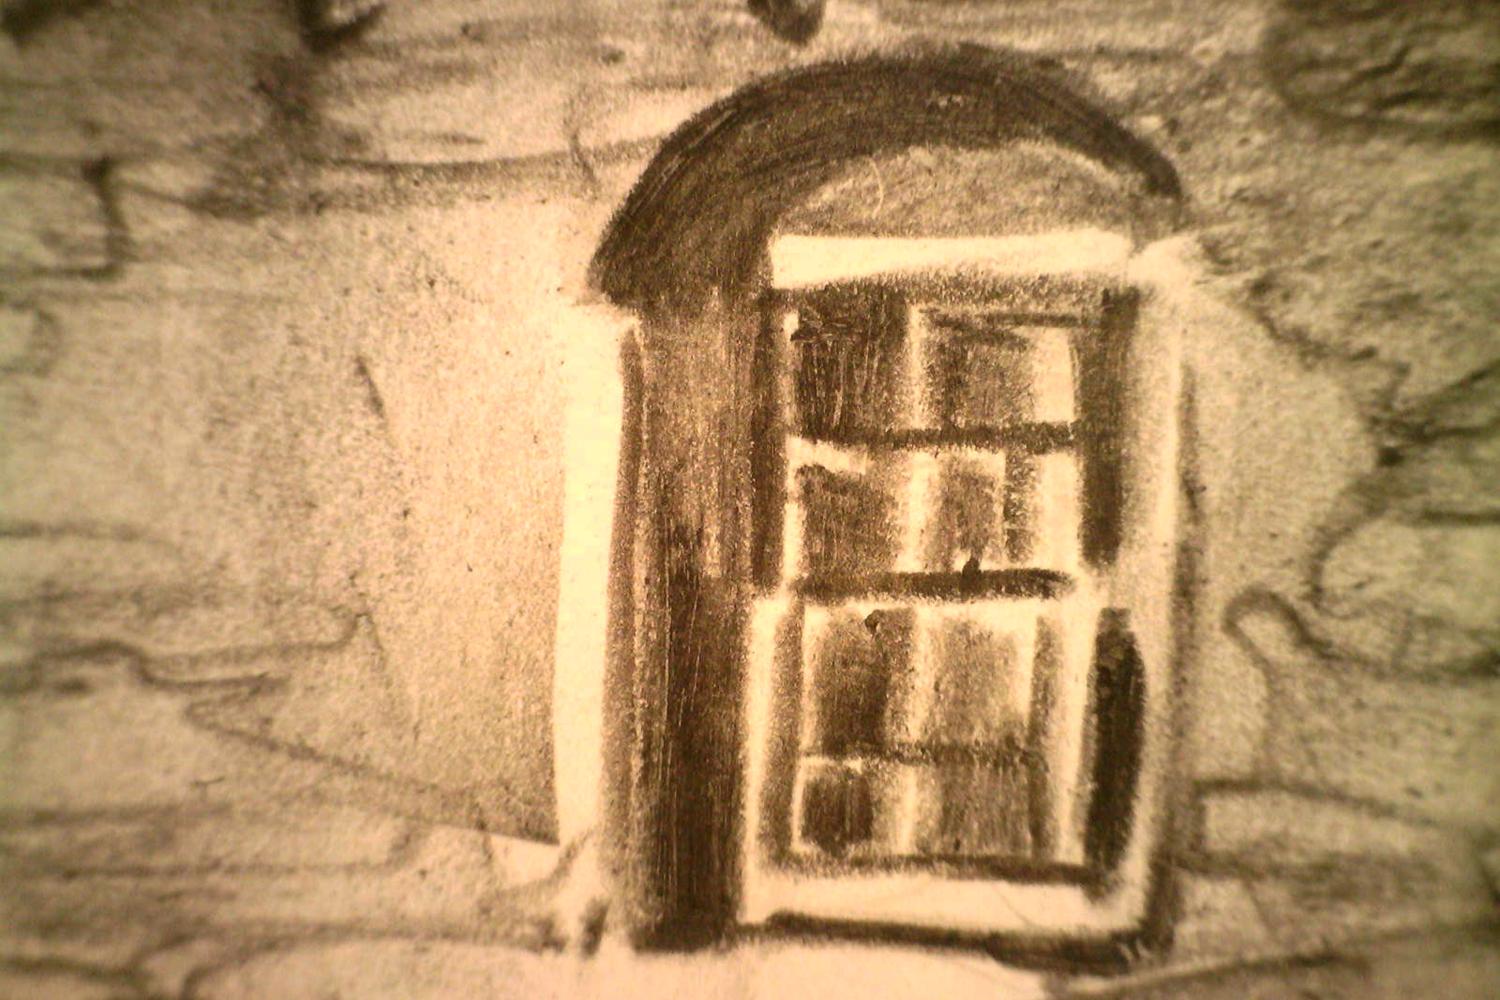 graphite drawing detail of a window